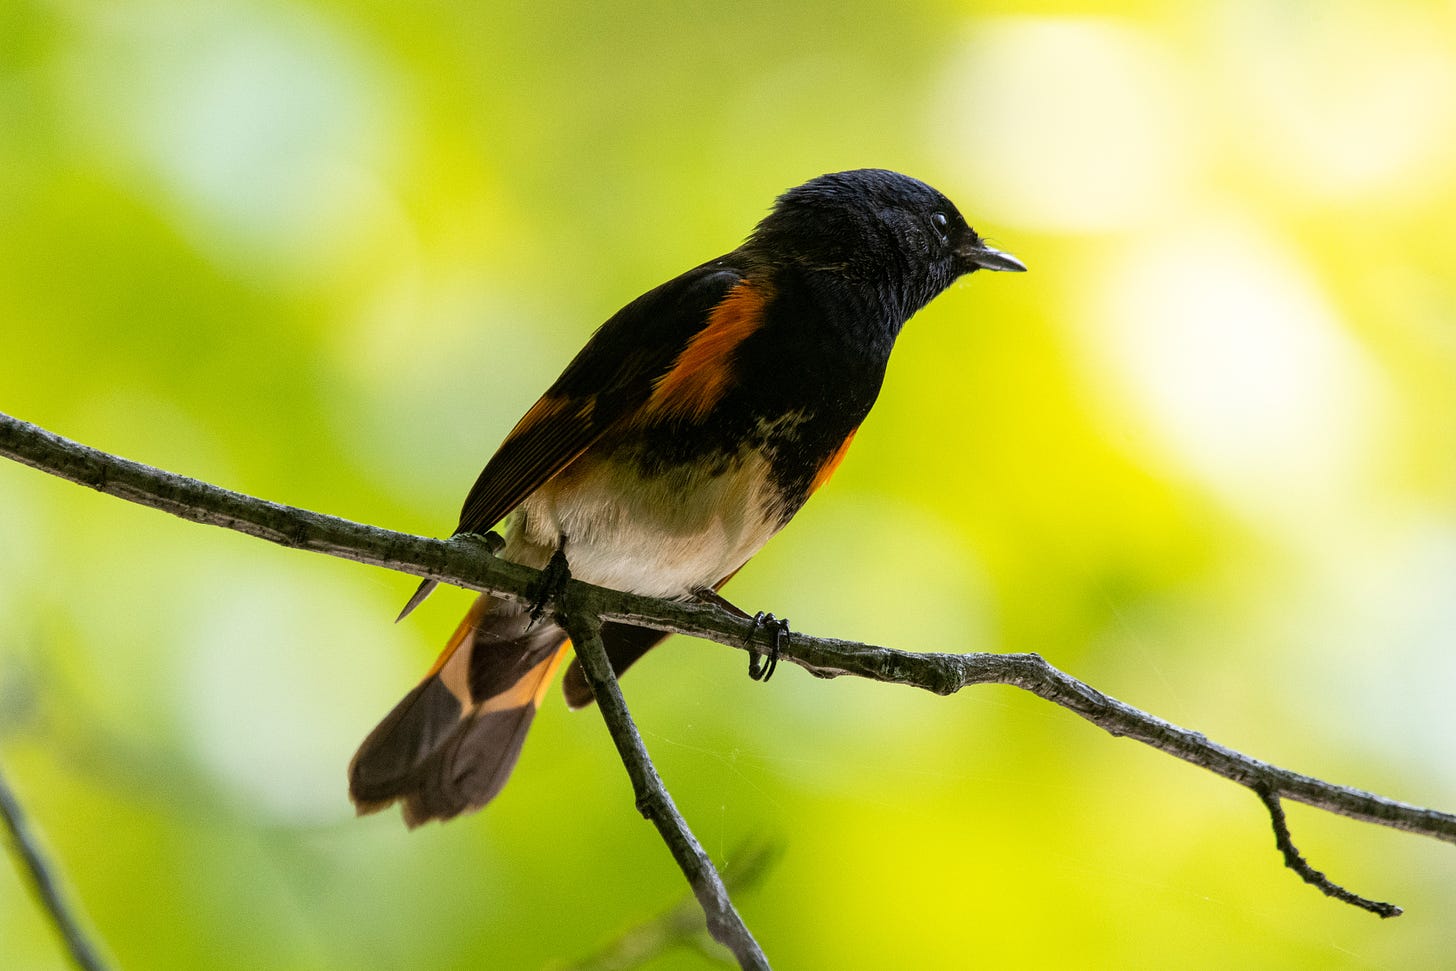 You will never see an American redstart looking more dignified